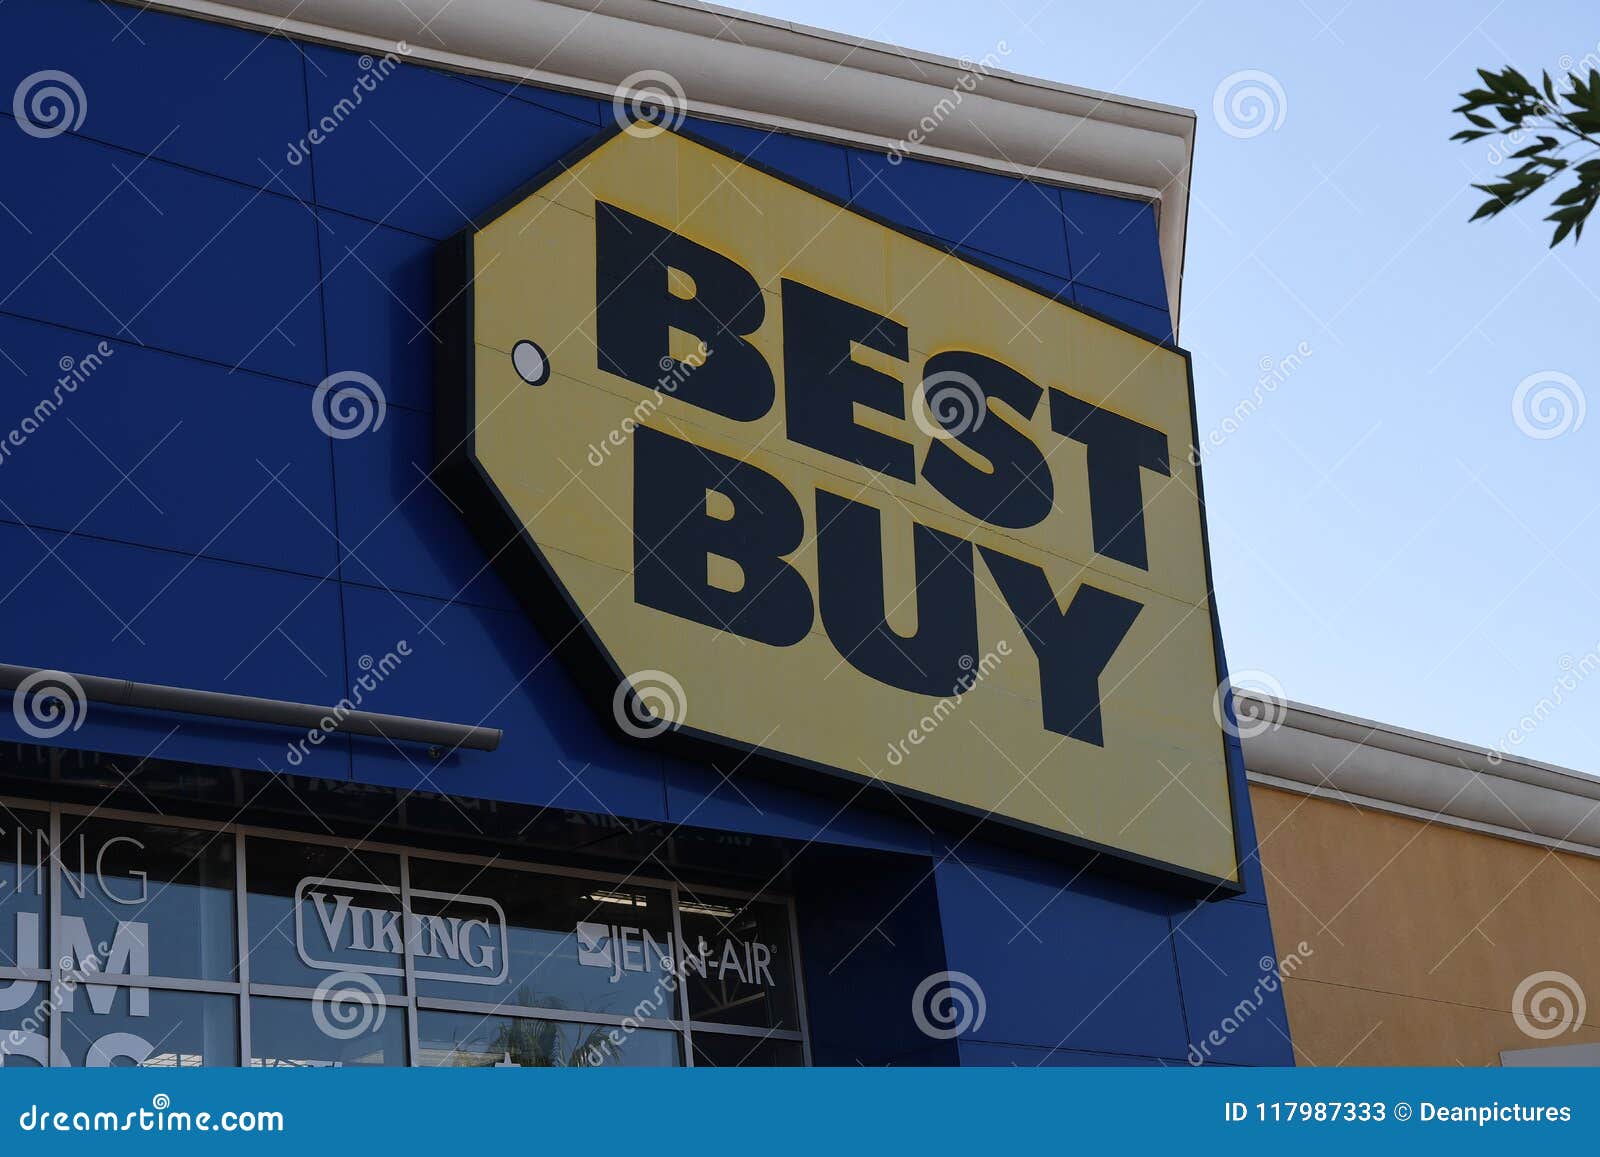 BEST BUY STORE editorial stock photo. Image of store - 117987333